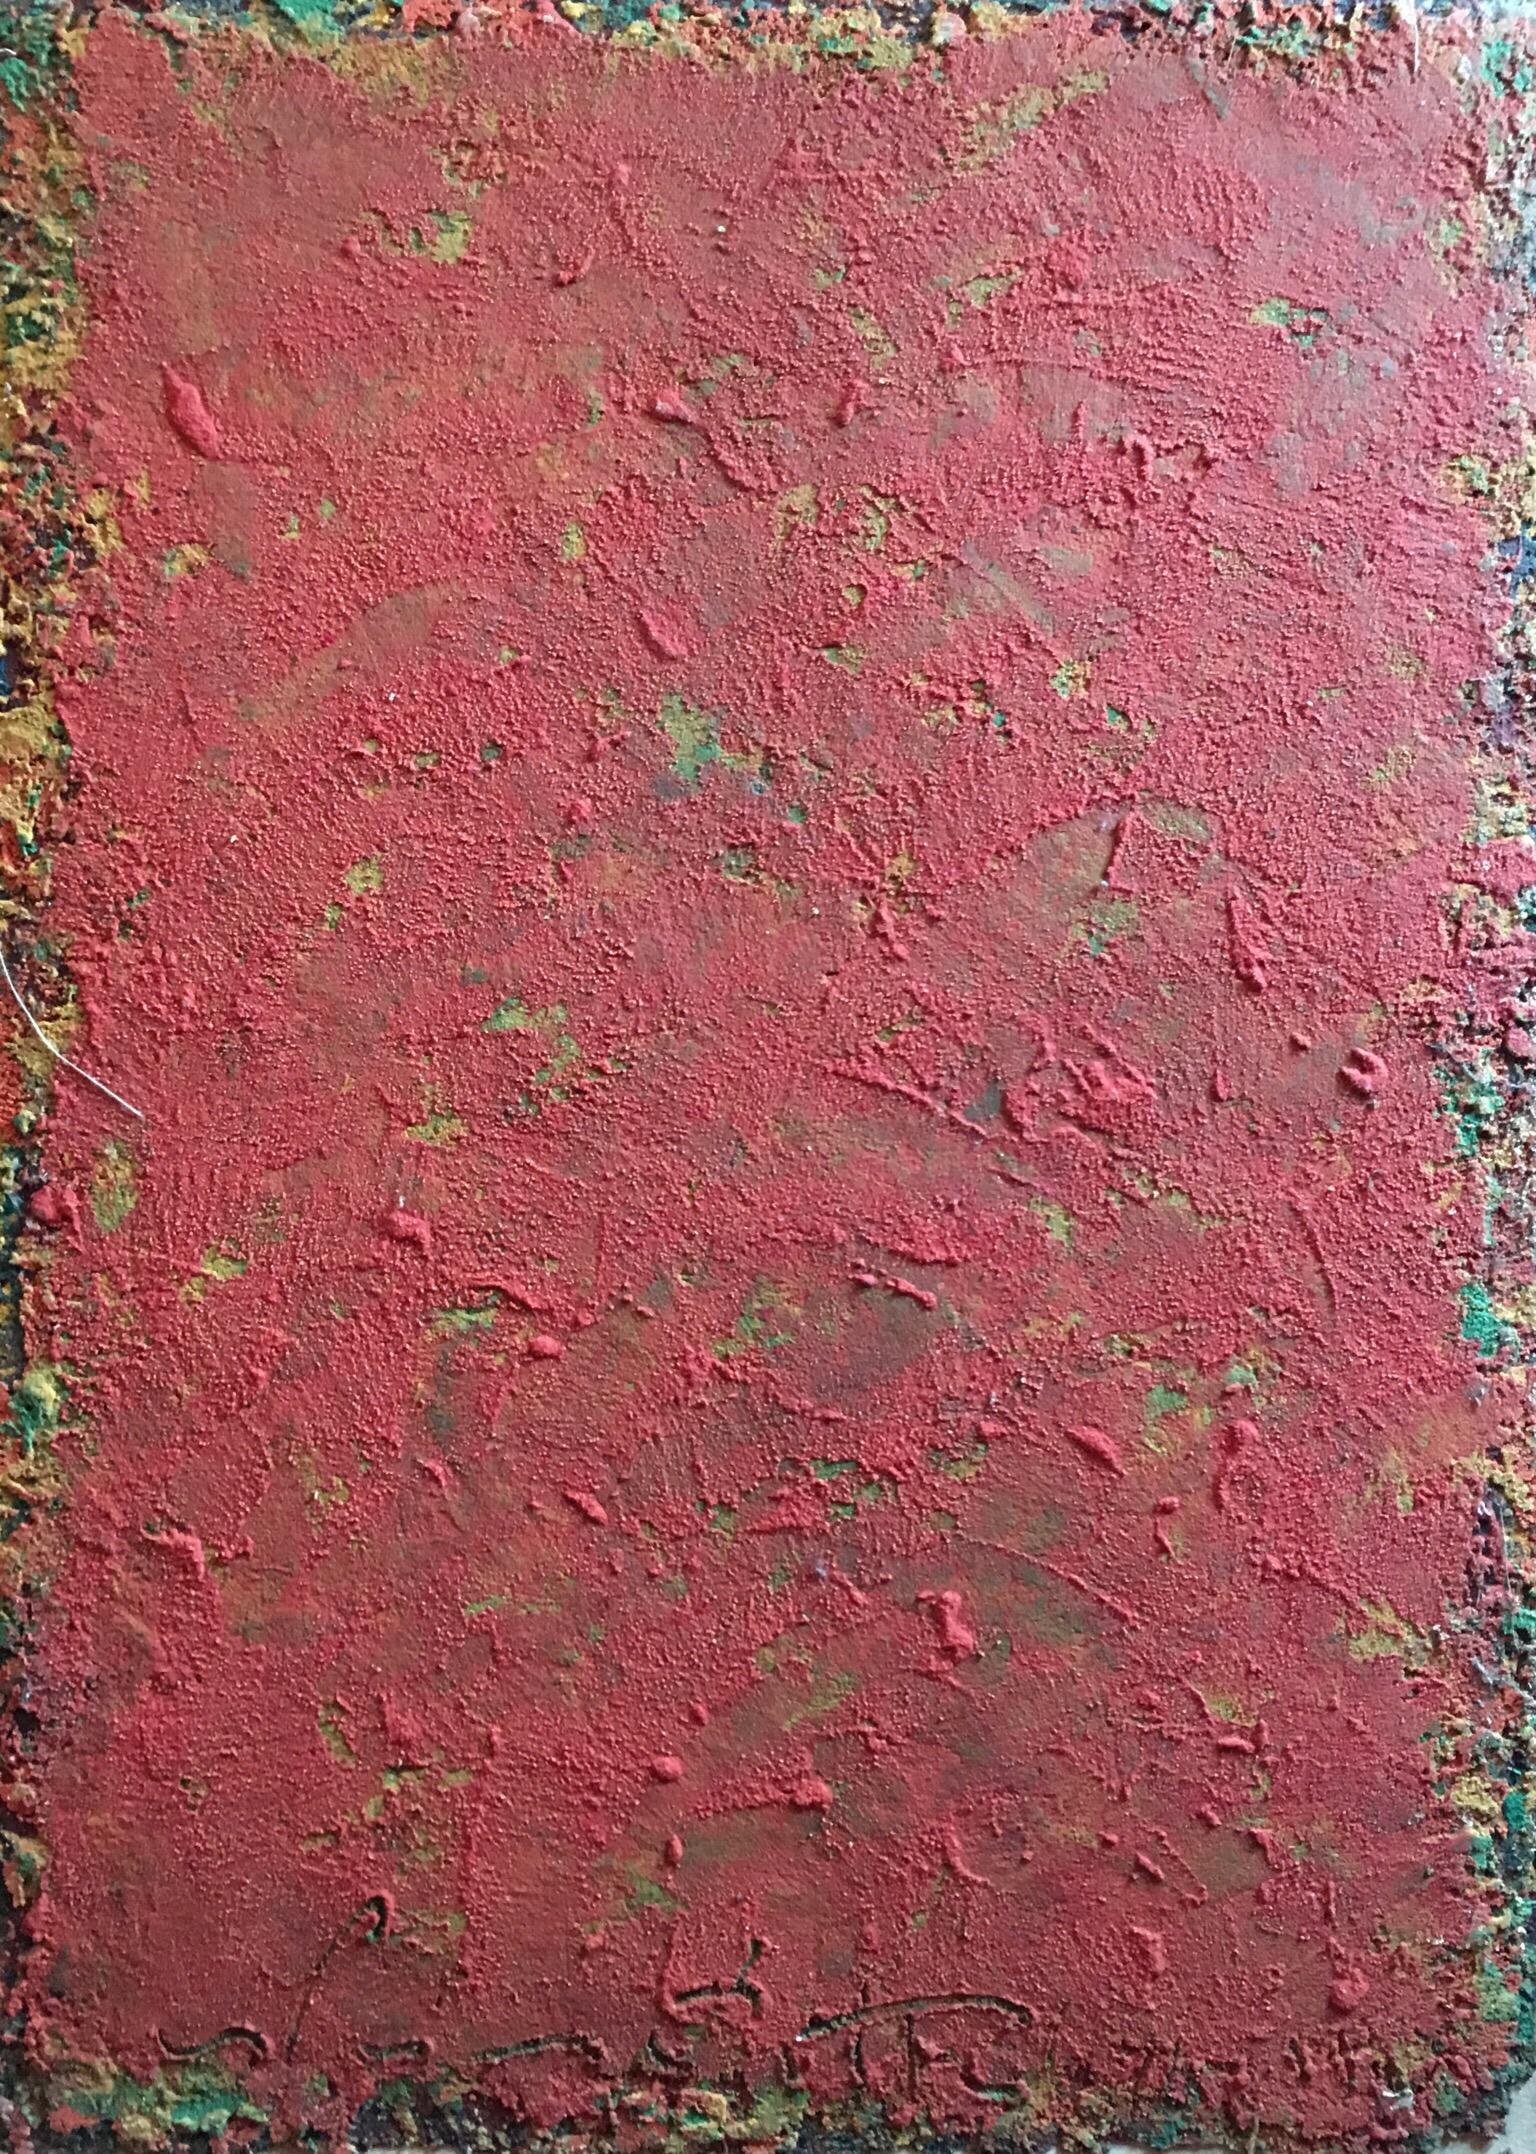 Unknown Abstract Painting - Large Red Block Abstract, Mixed Medium, Original Painting